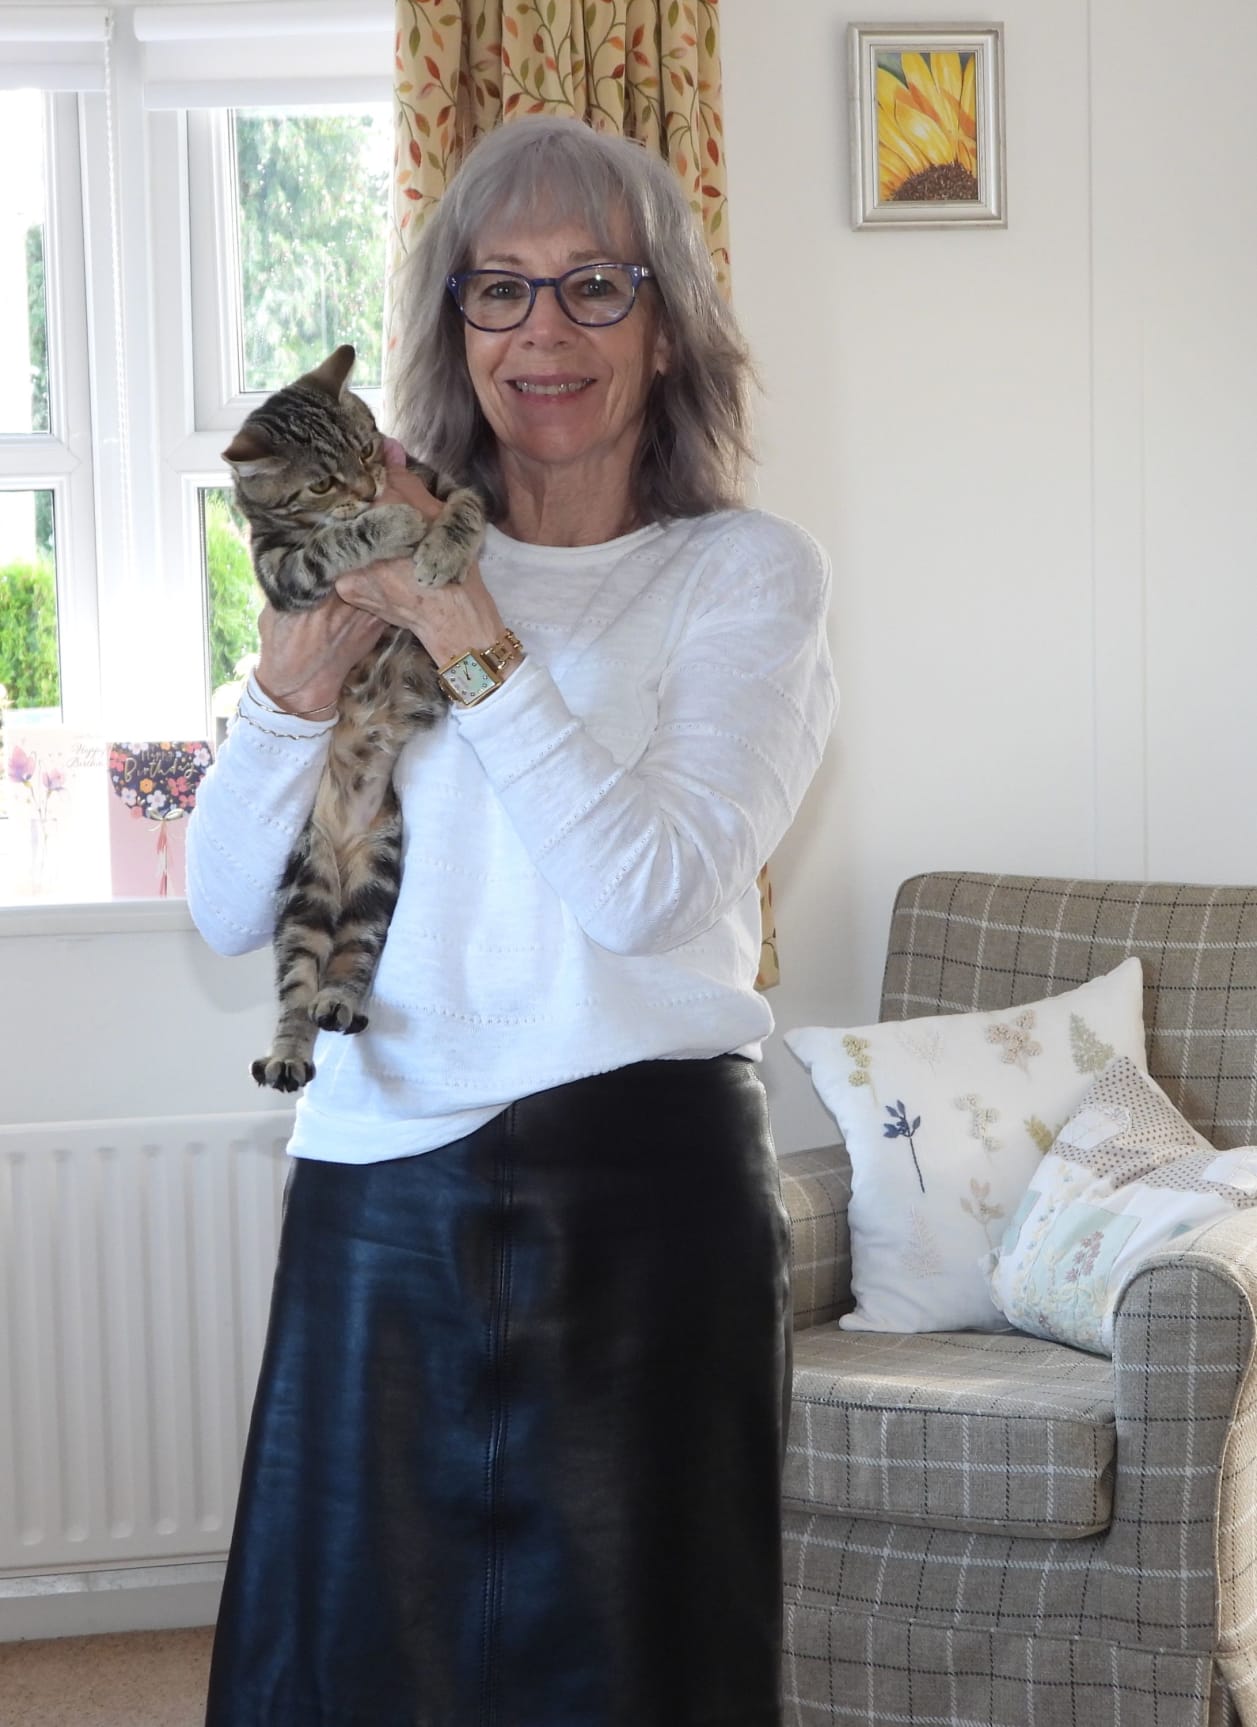 Picture of Lizzie Gumley, one of our Mindfulness for Health bursary recipients, with her cat